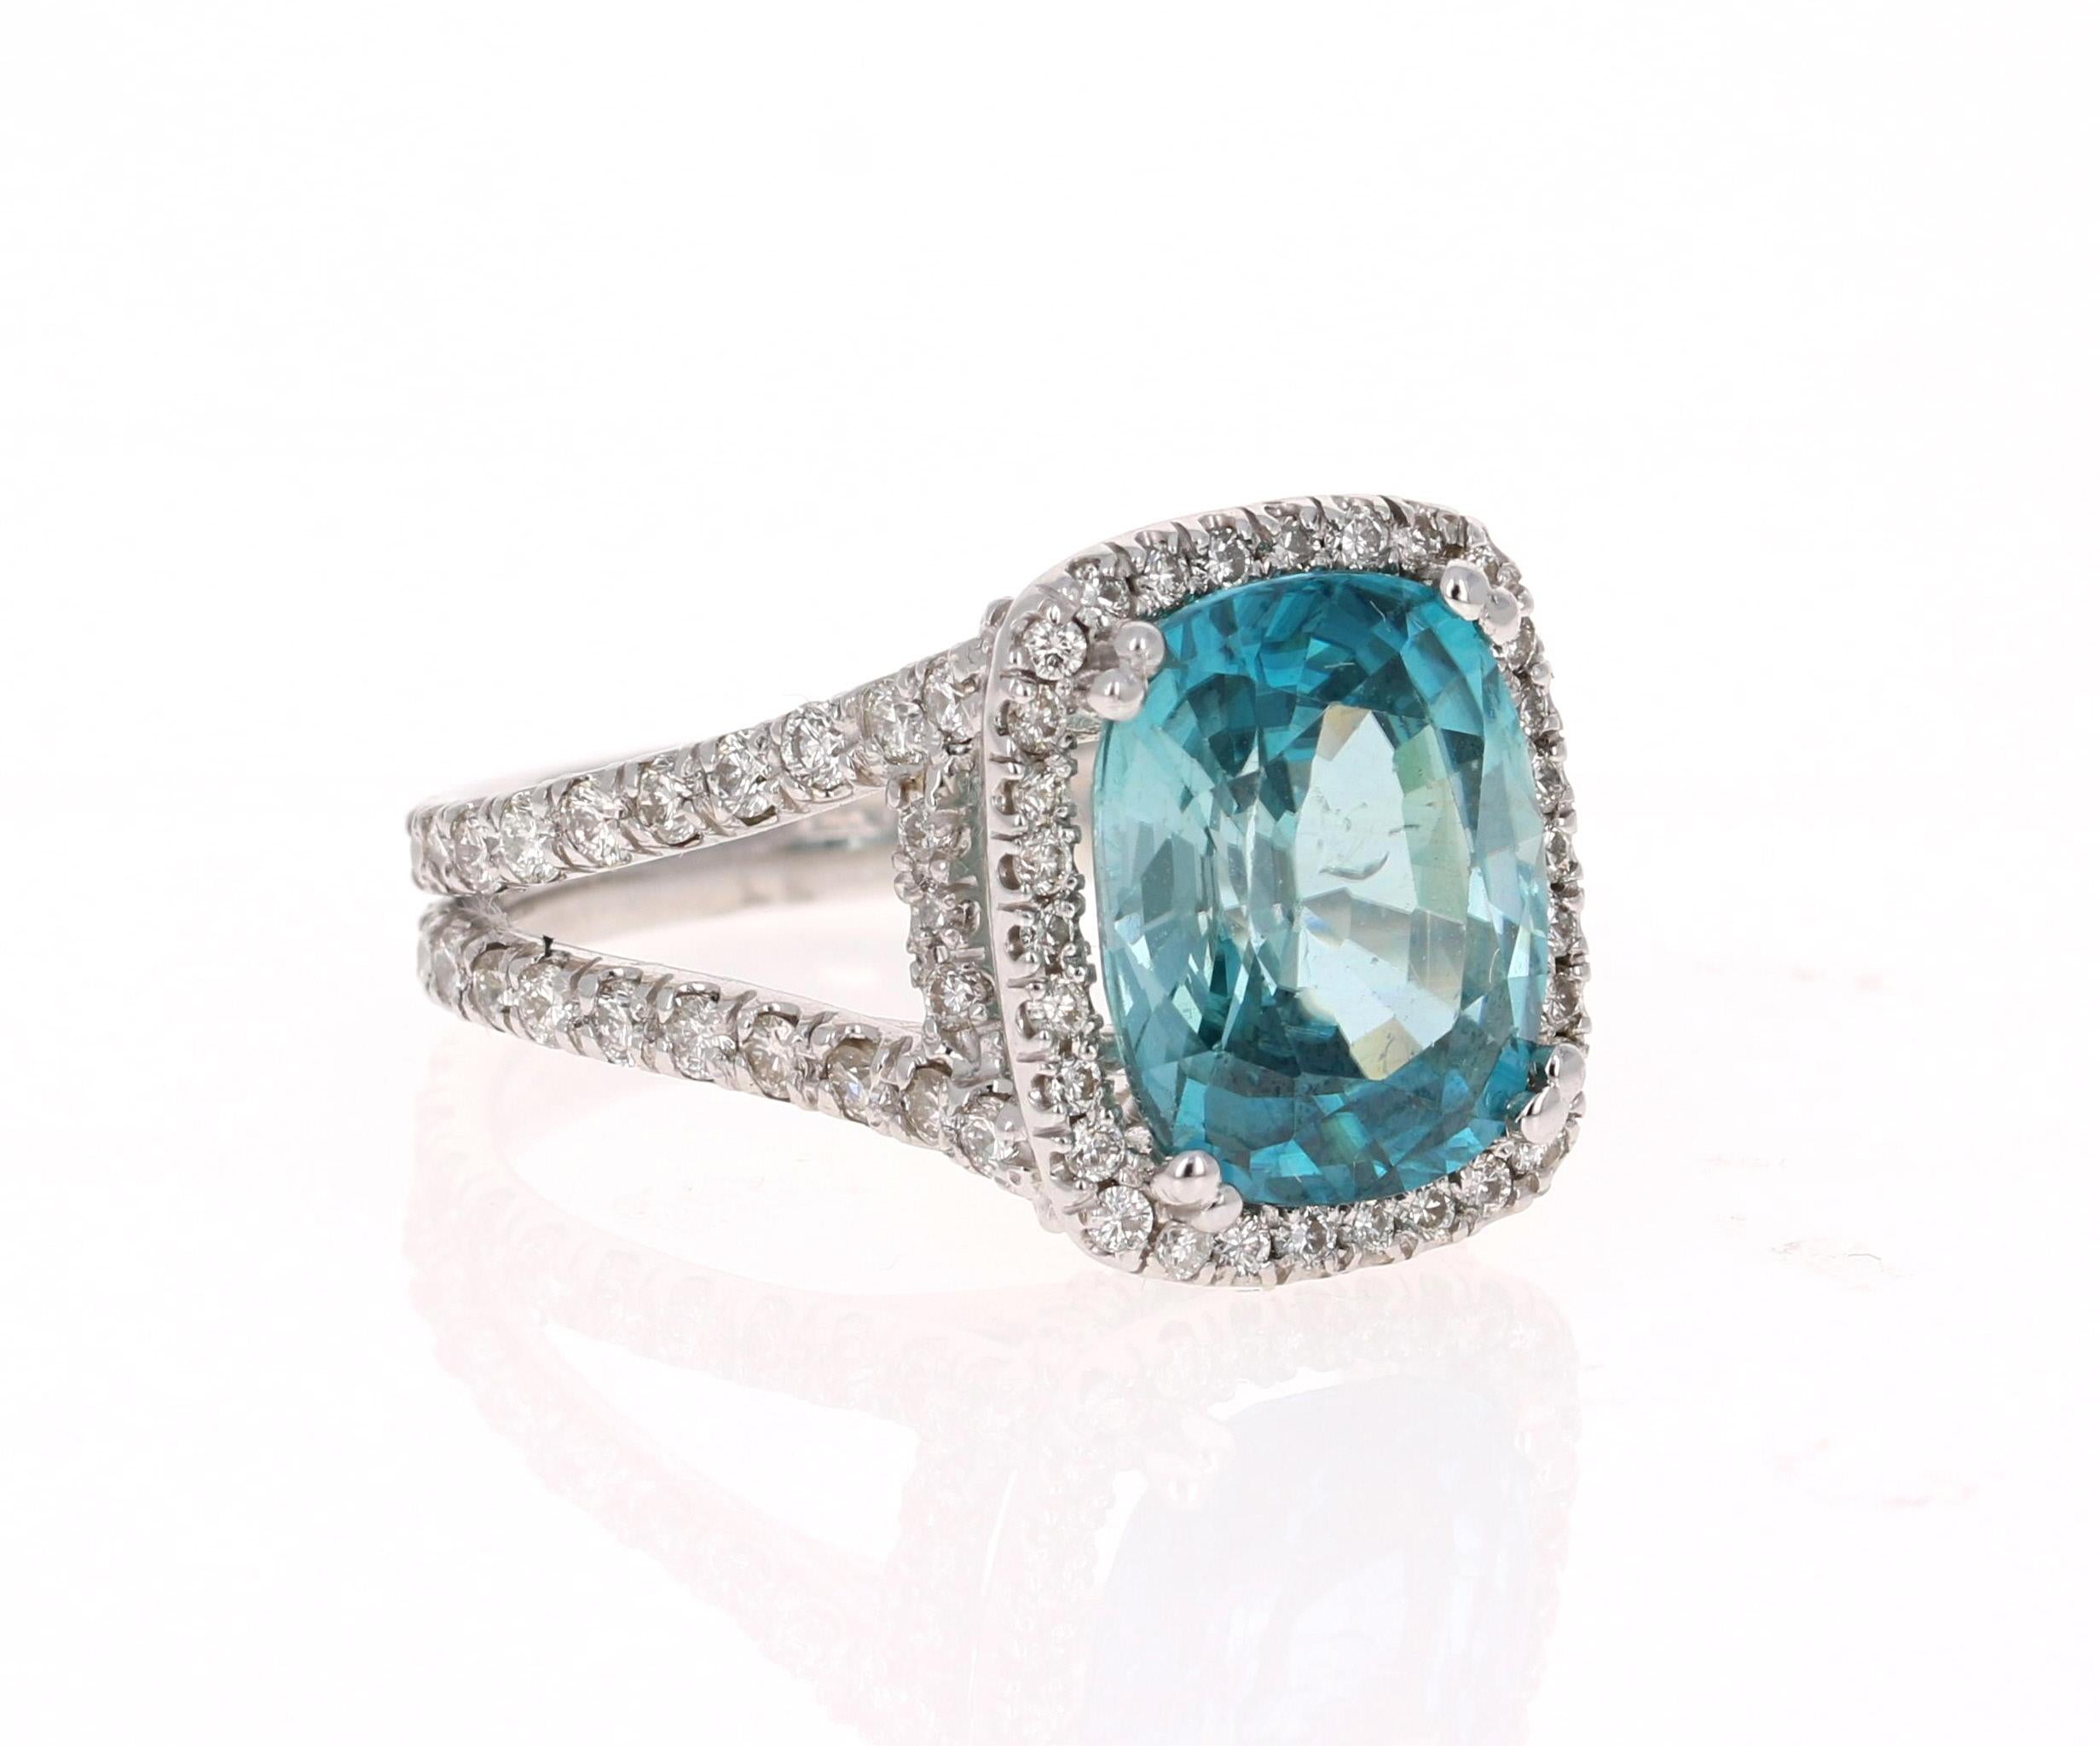 A beautiful Blue Zircon and Diamond ring that can be a nice Engagement ring or a gorgeous Cocktail Ring!
Blue Zircon is a natural stone mined mainly in Sri Lanka, Myanmar, and Australia.  

This ring has a large & beautiful Oval Cut Blue Zircon that